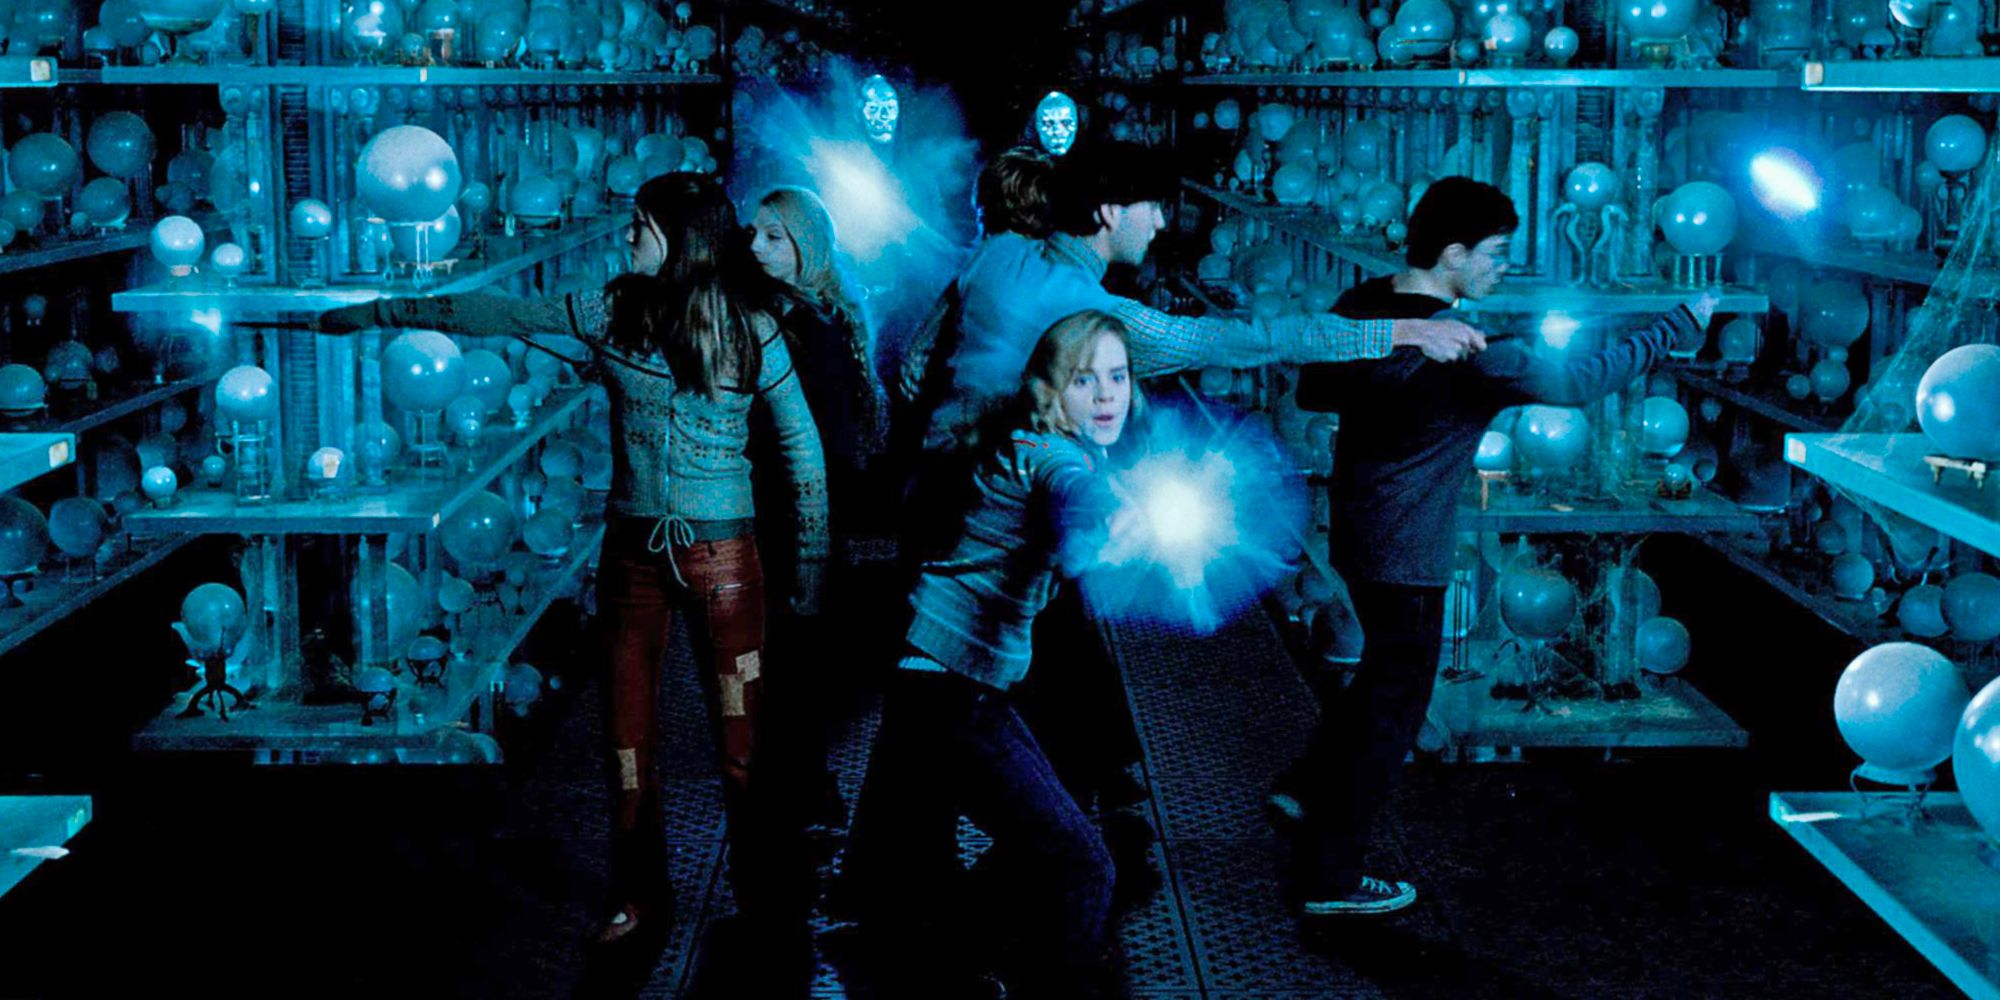 Harry Potter and the members of Dumbledore's Army fight off Death Eaters in all directions in the Ministry of Magic.